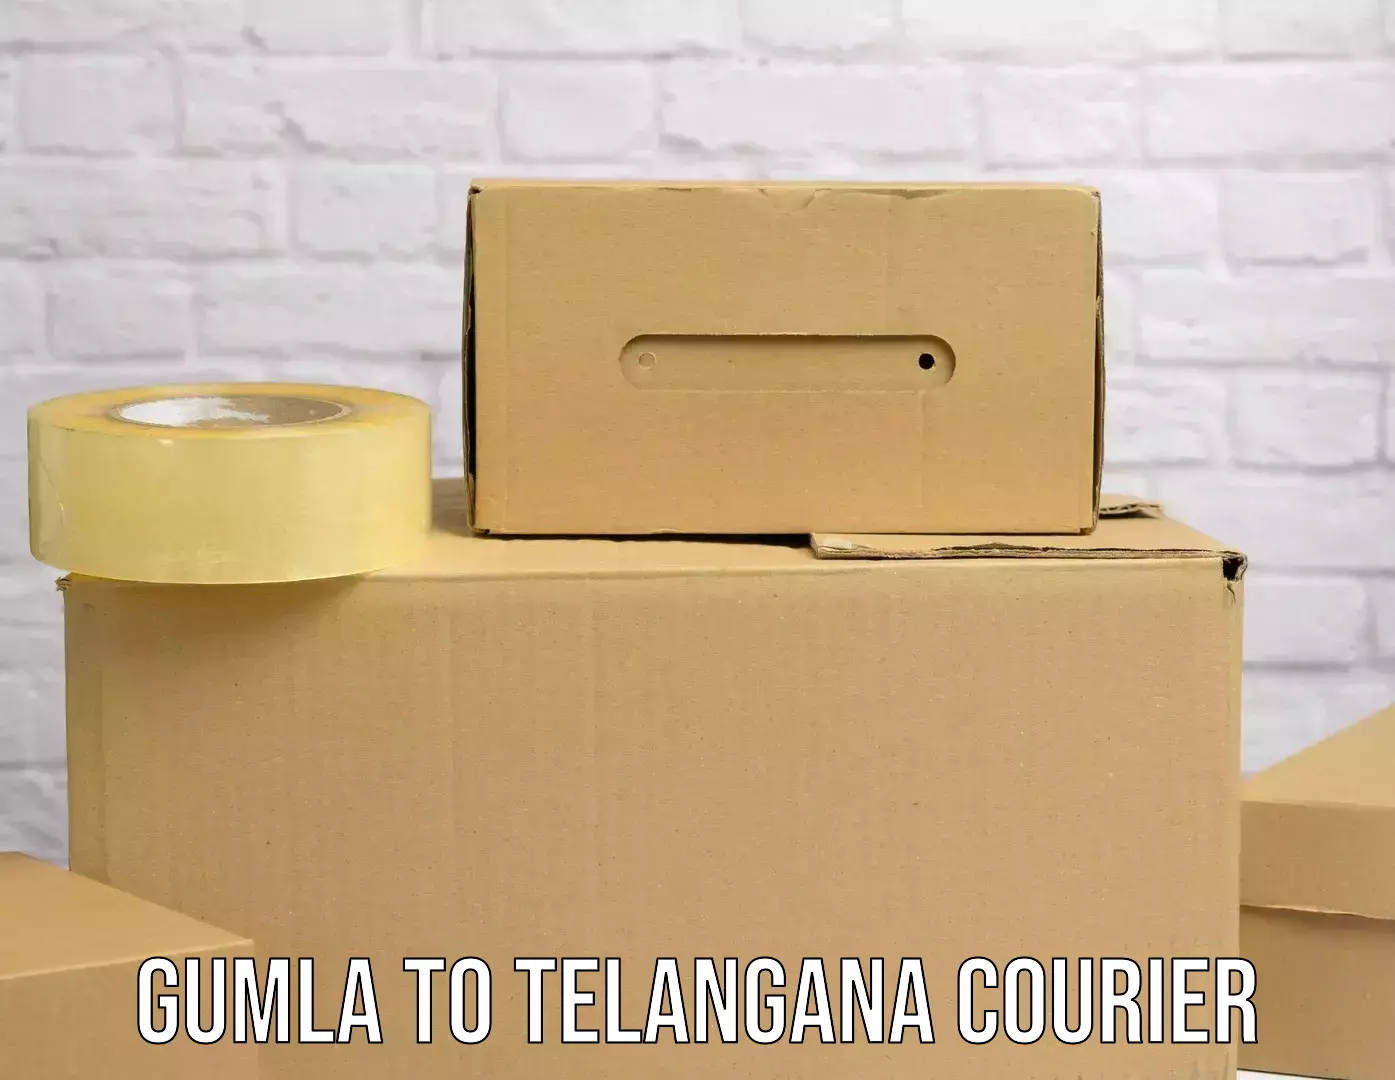 Local delivery service Gumla to Khairatabad